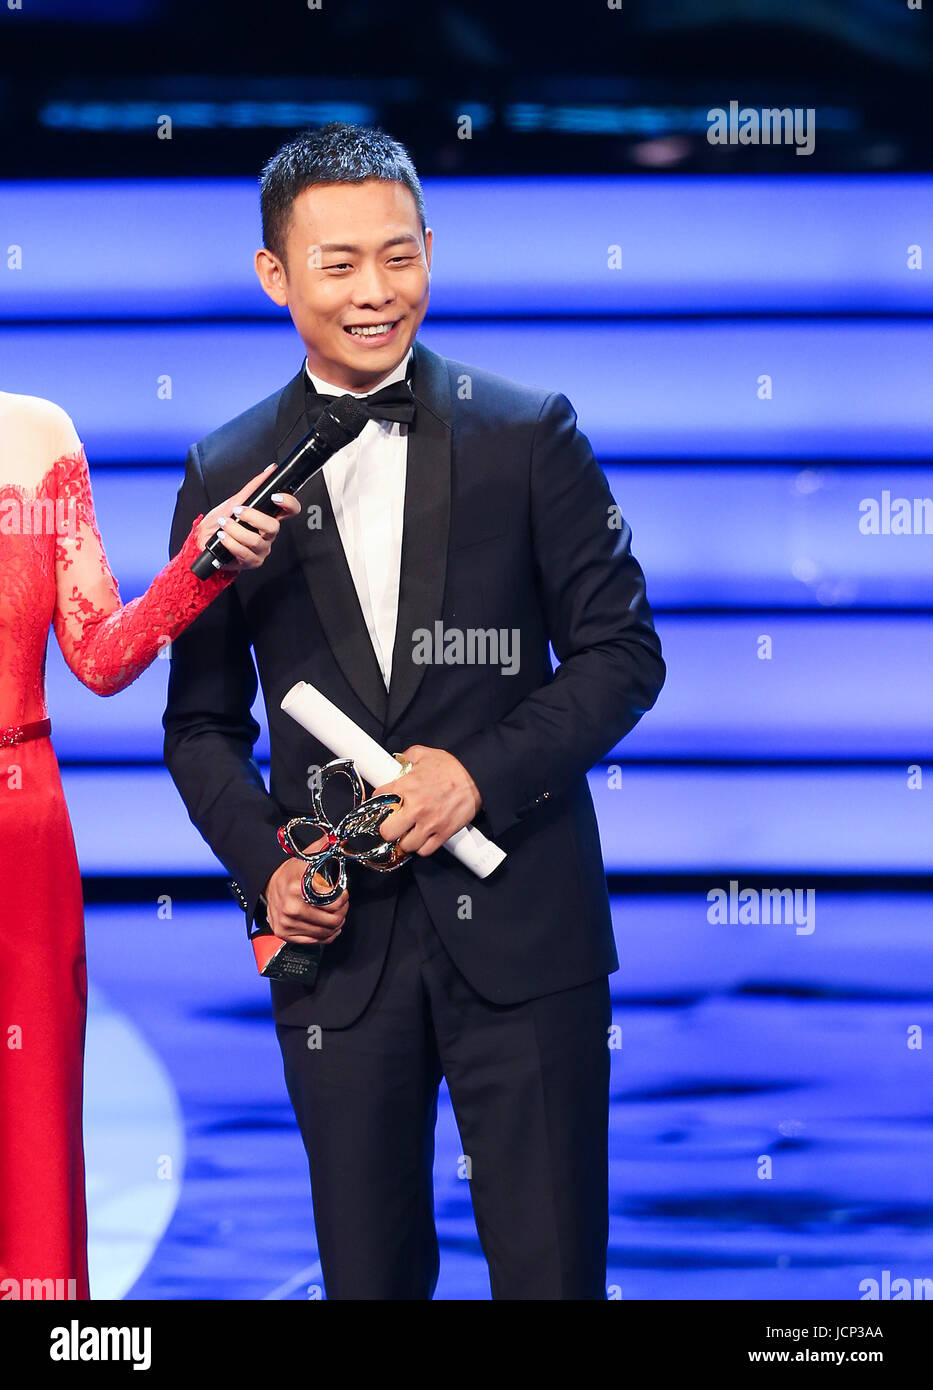 Shanghai, China. 16th June, 2017. Actor Zhang Yi wins Magnolia Award for best actor of the 23rd Shanghai TV Festival, in Shanghai, east China, June 16, 2017. Credit: Ding Ting/Xinhua/Alamy Live News Stock Photo